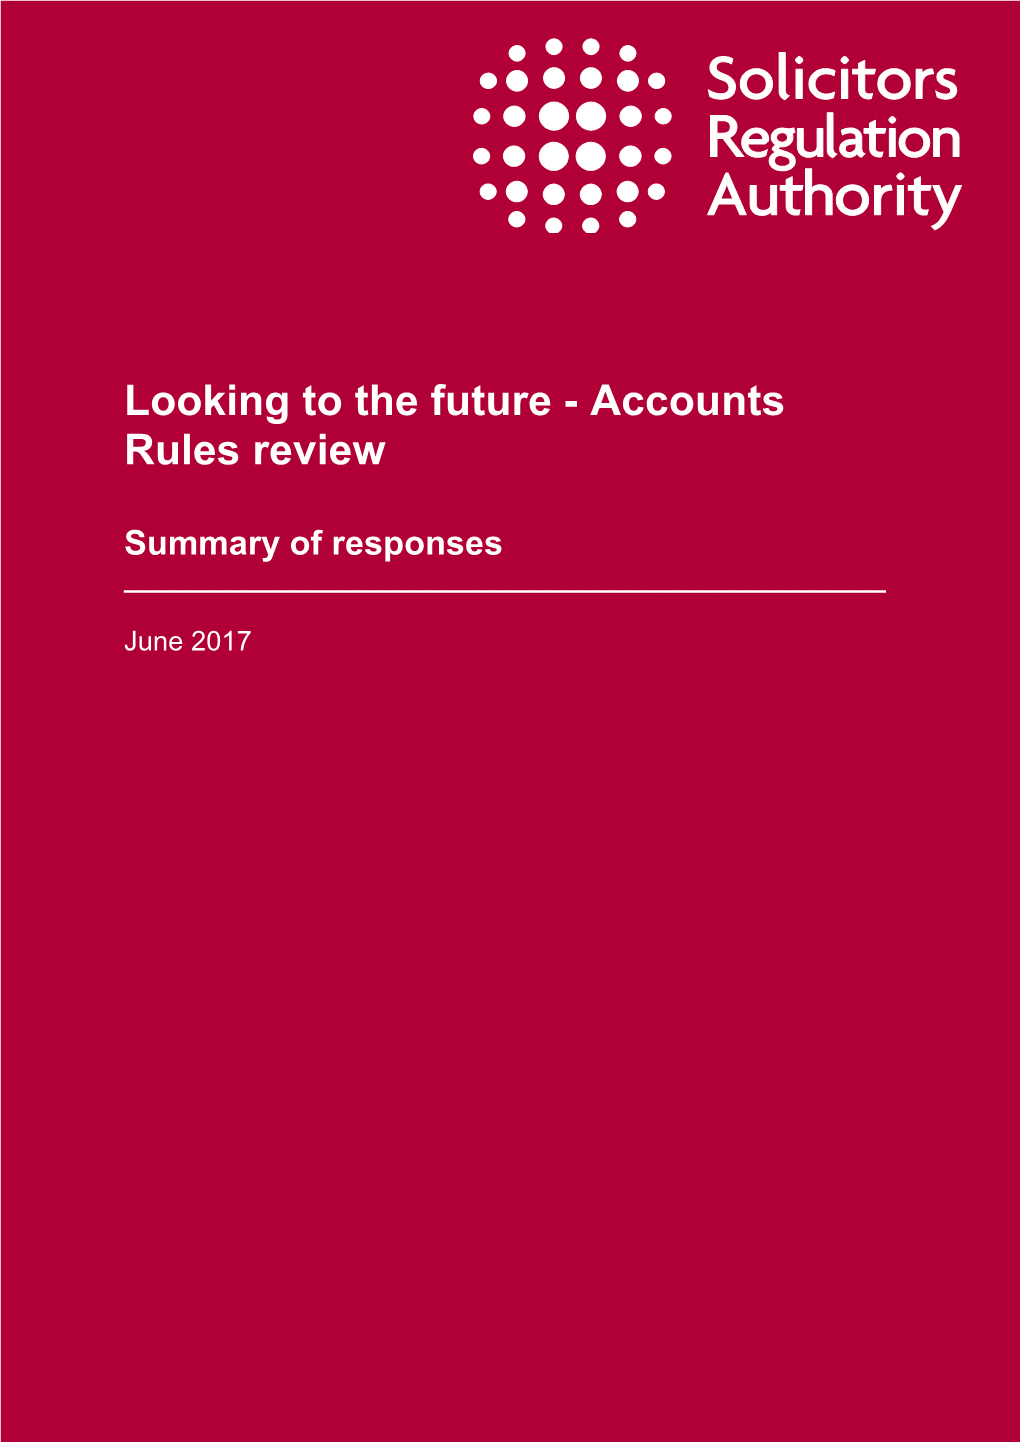 Looking to the Future - Accounts Rules Review